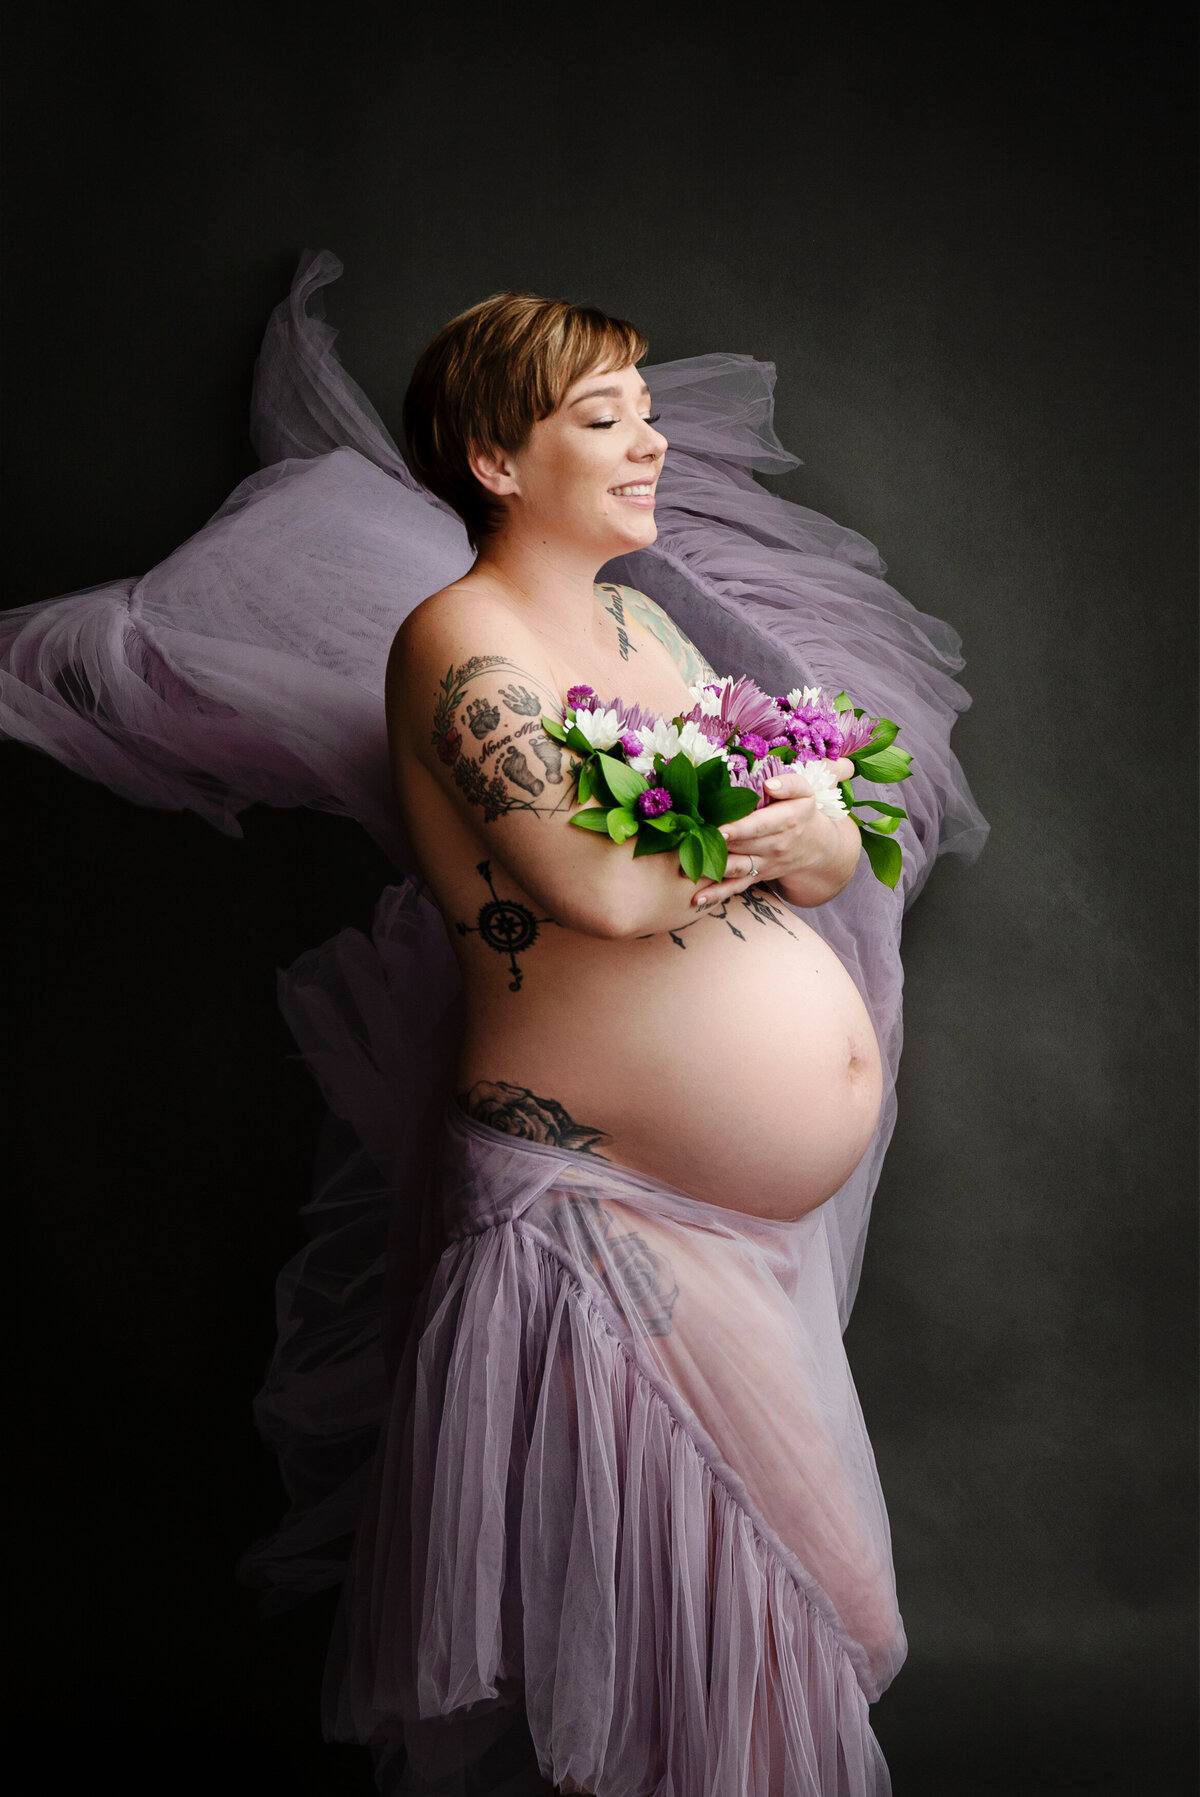 st-louis-maternity-photographer-expecting-mother-nude-with-purple-fabric-covering-her-while-she-cradles-a-bouquet-of-flowers